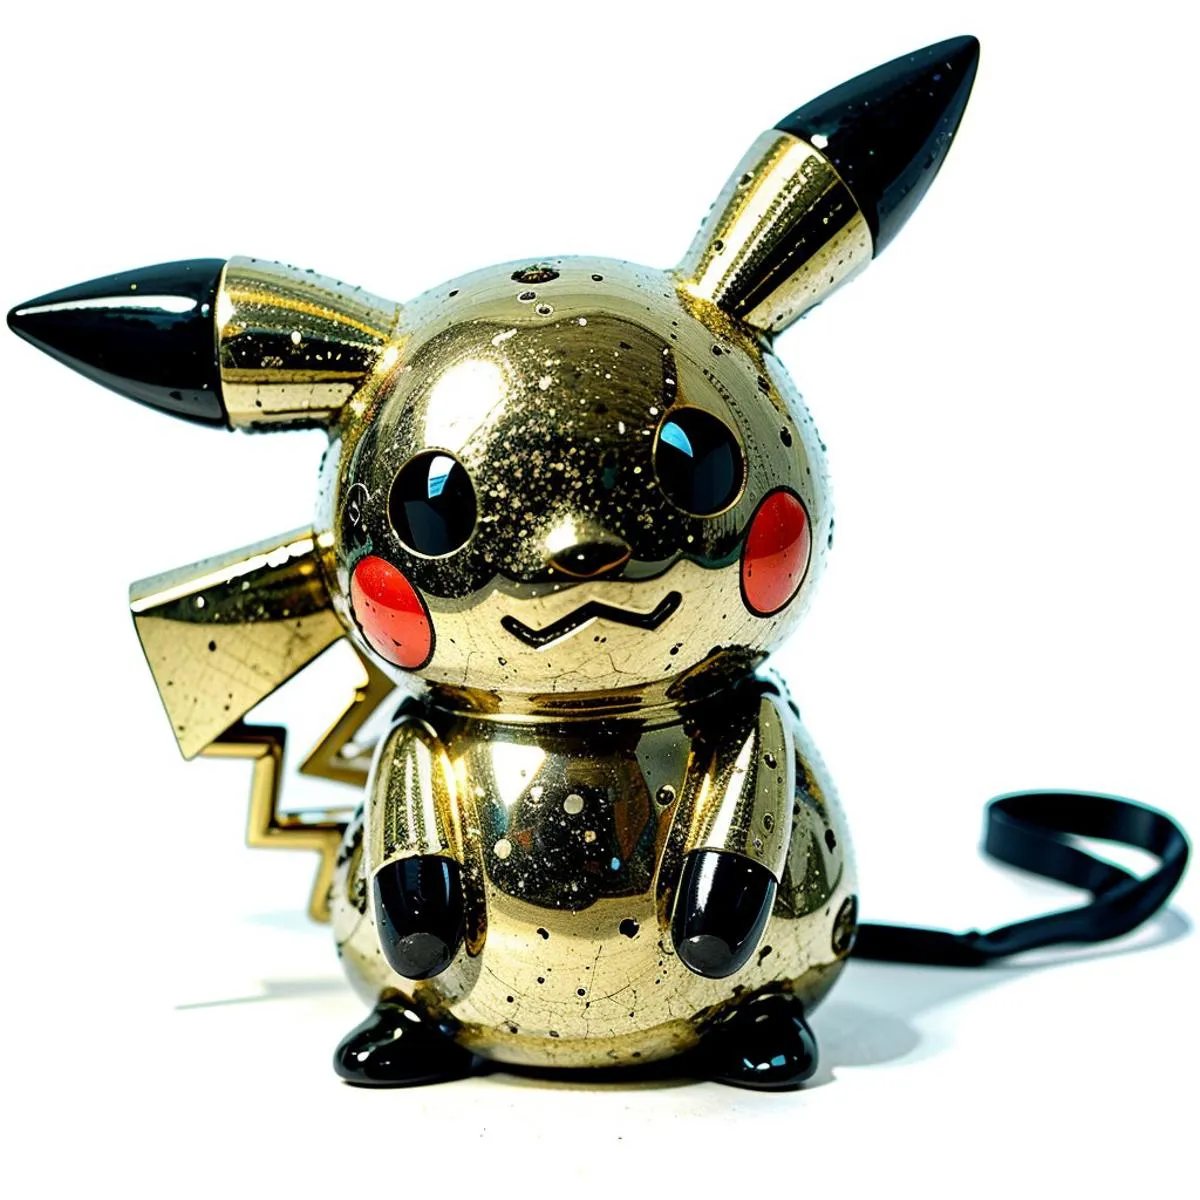 Gold Pikachu figurine with metallic finish, AI generated image using stable diffusion.